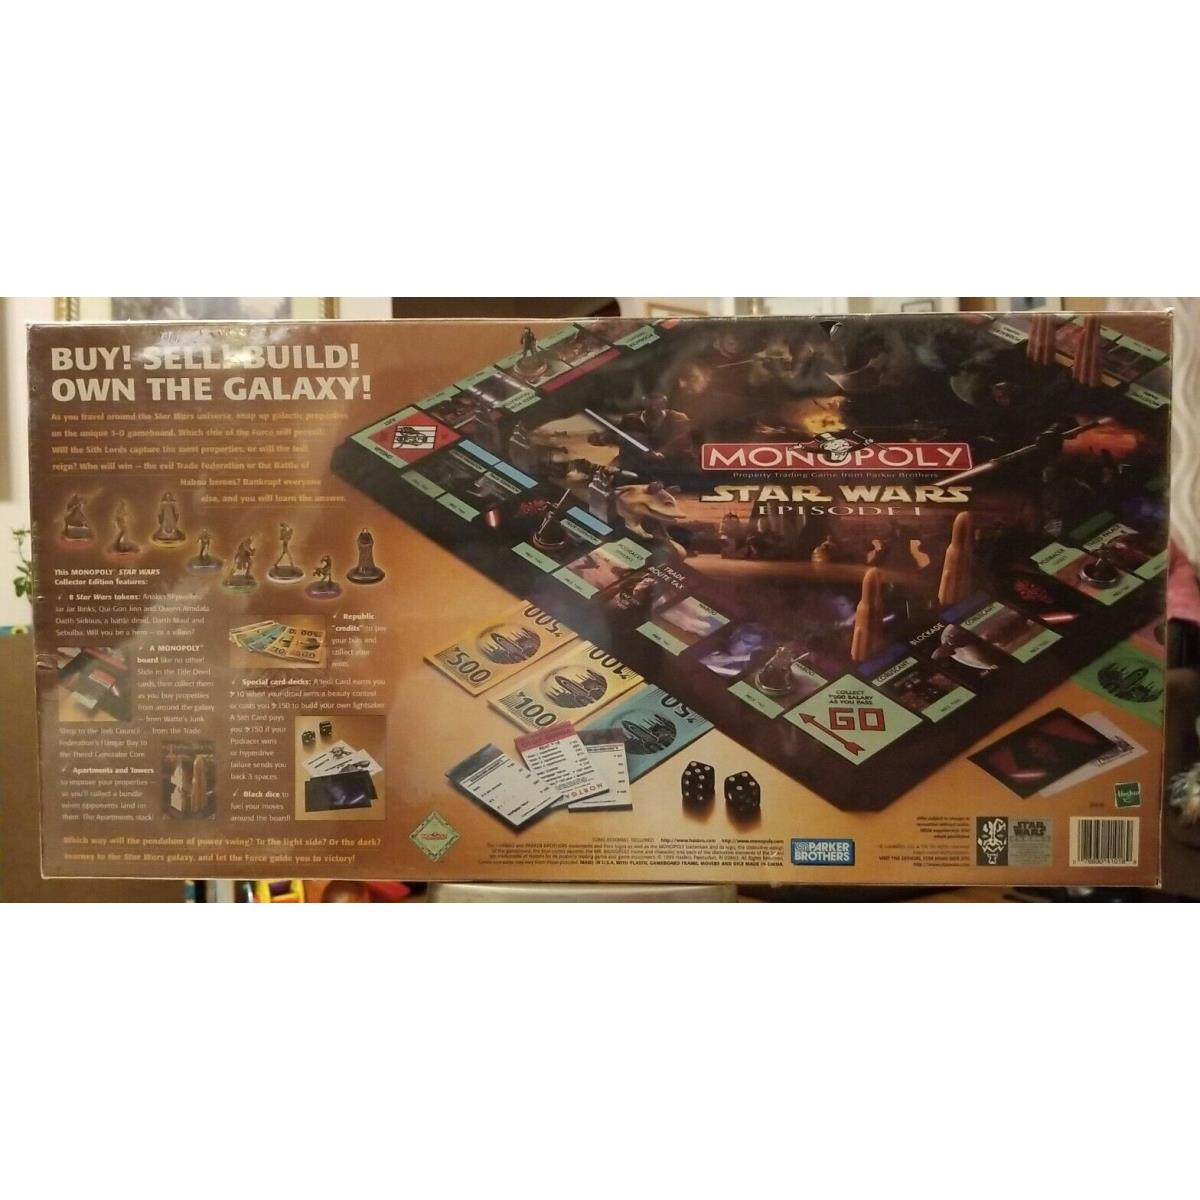 Star Wars Episode 1 Monopoly Collector Edition 3-D Gameboard